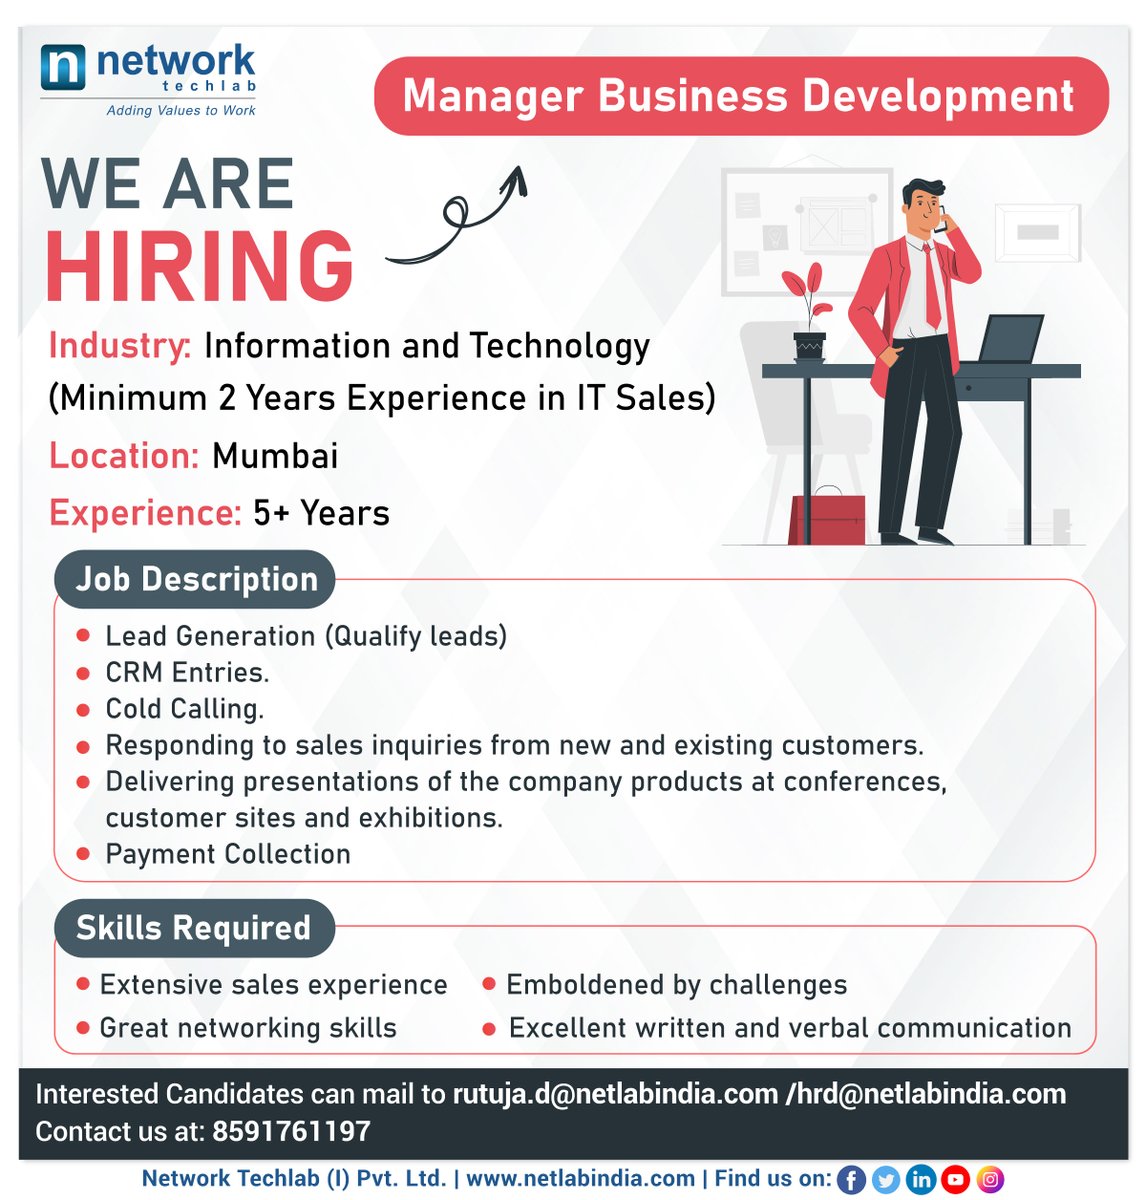 Get a mind blowing opportunity to work as a business development manager in the IT domain with the fastest growing organization in the country. 

#ntipl #career #jobs #opportunity #hiring #developmentmanager #business